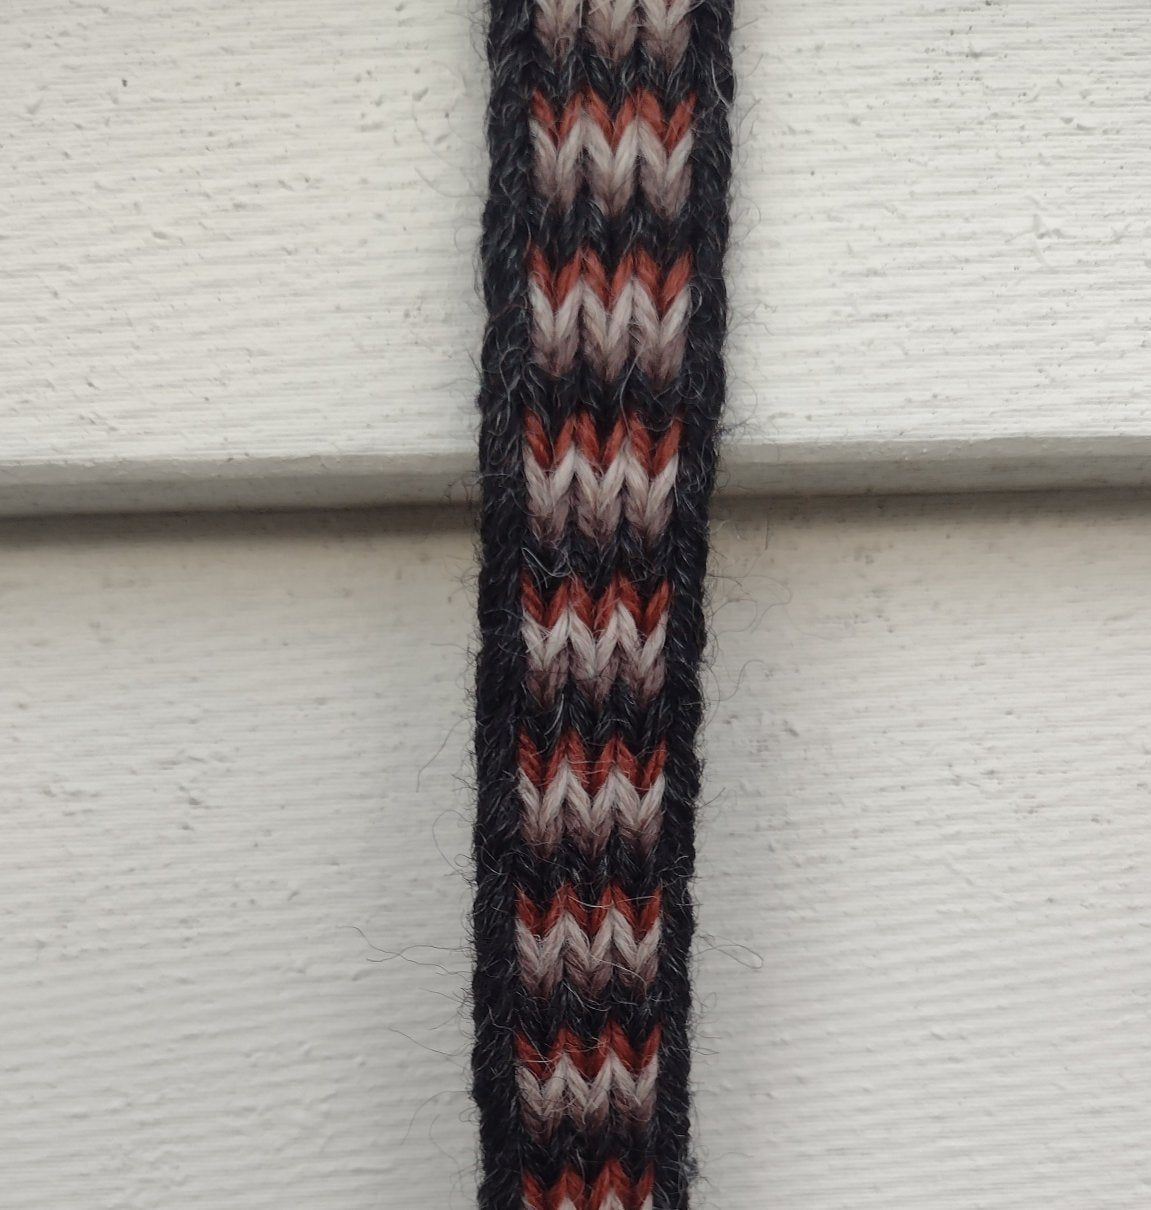 Striped belt in humble colours